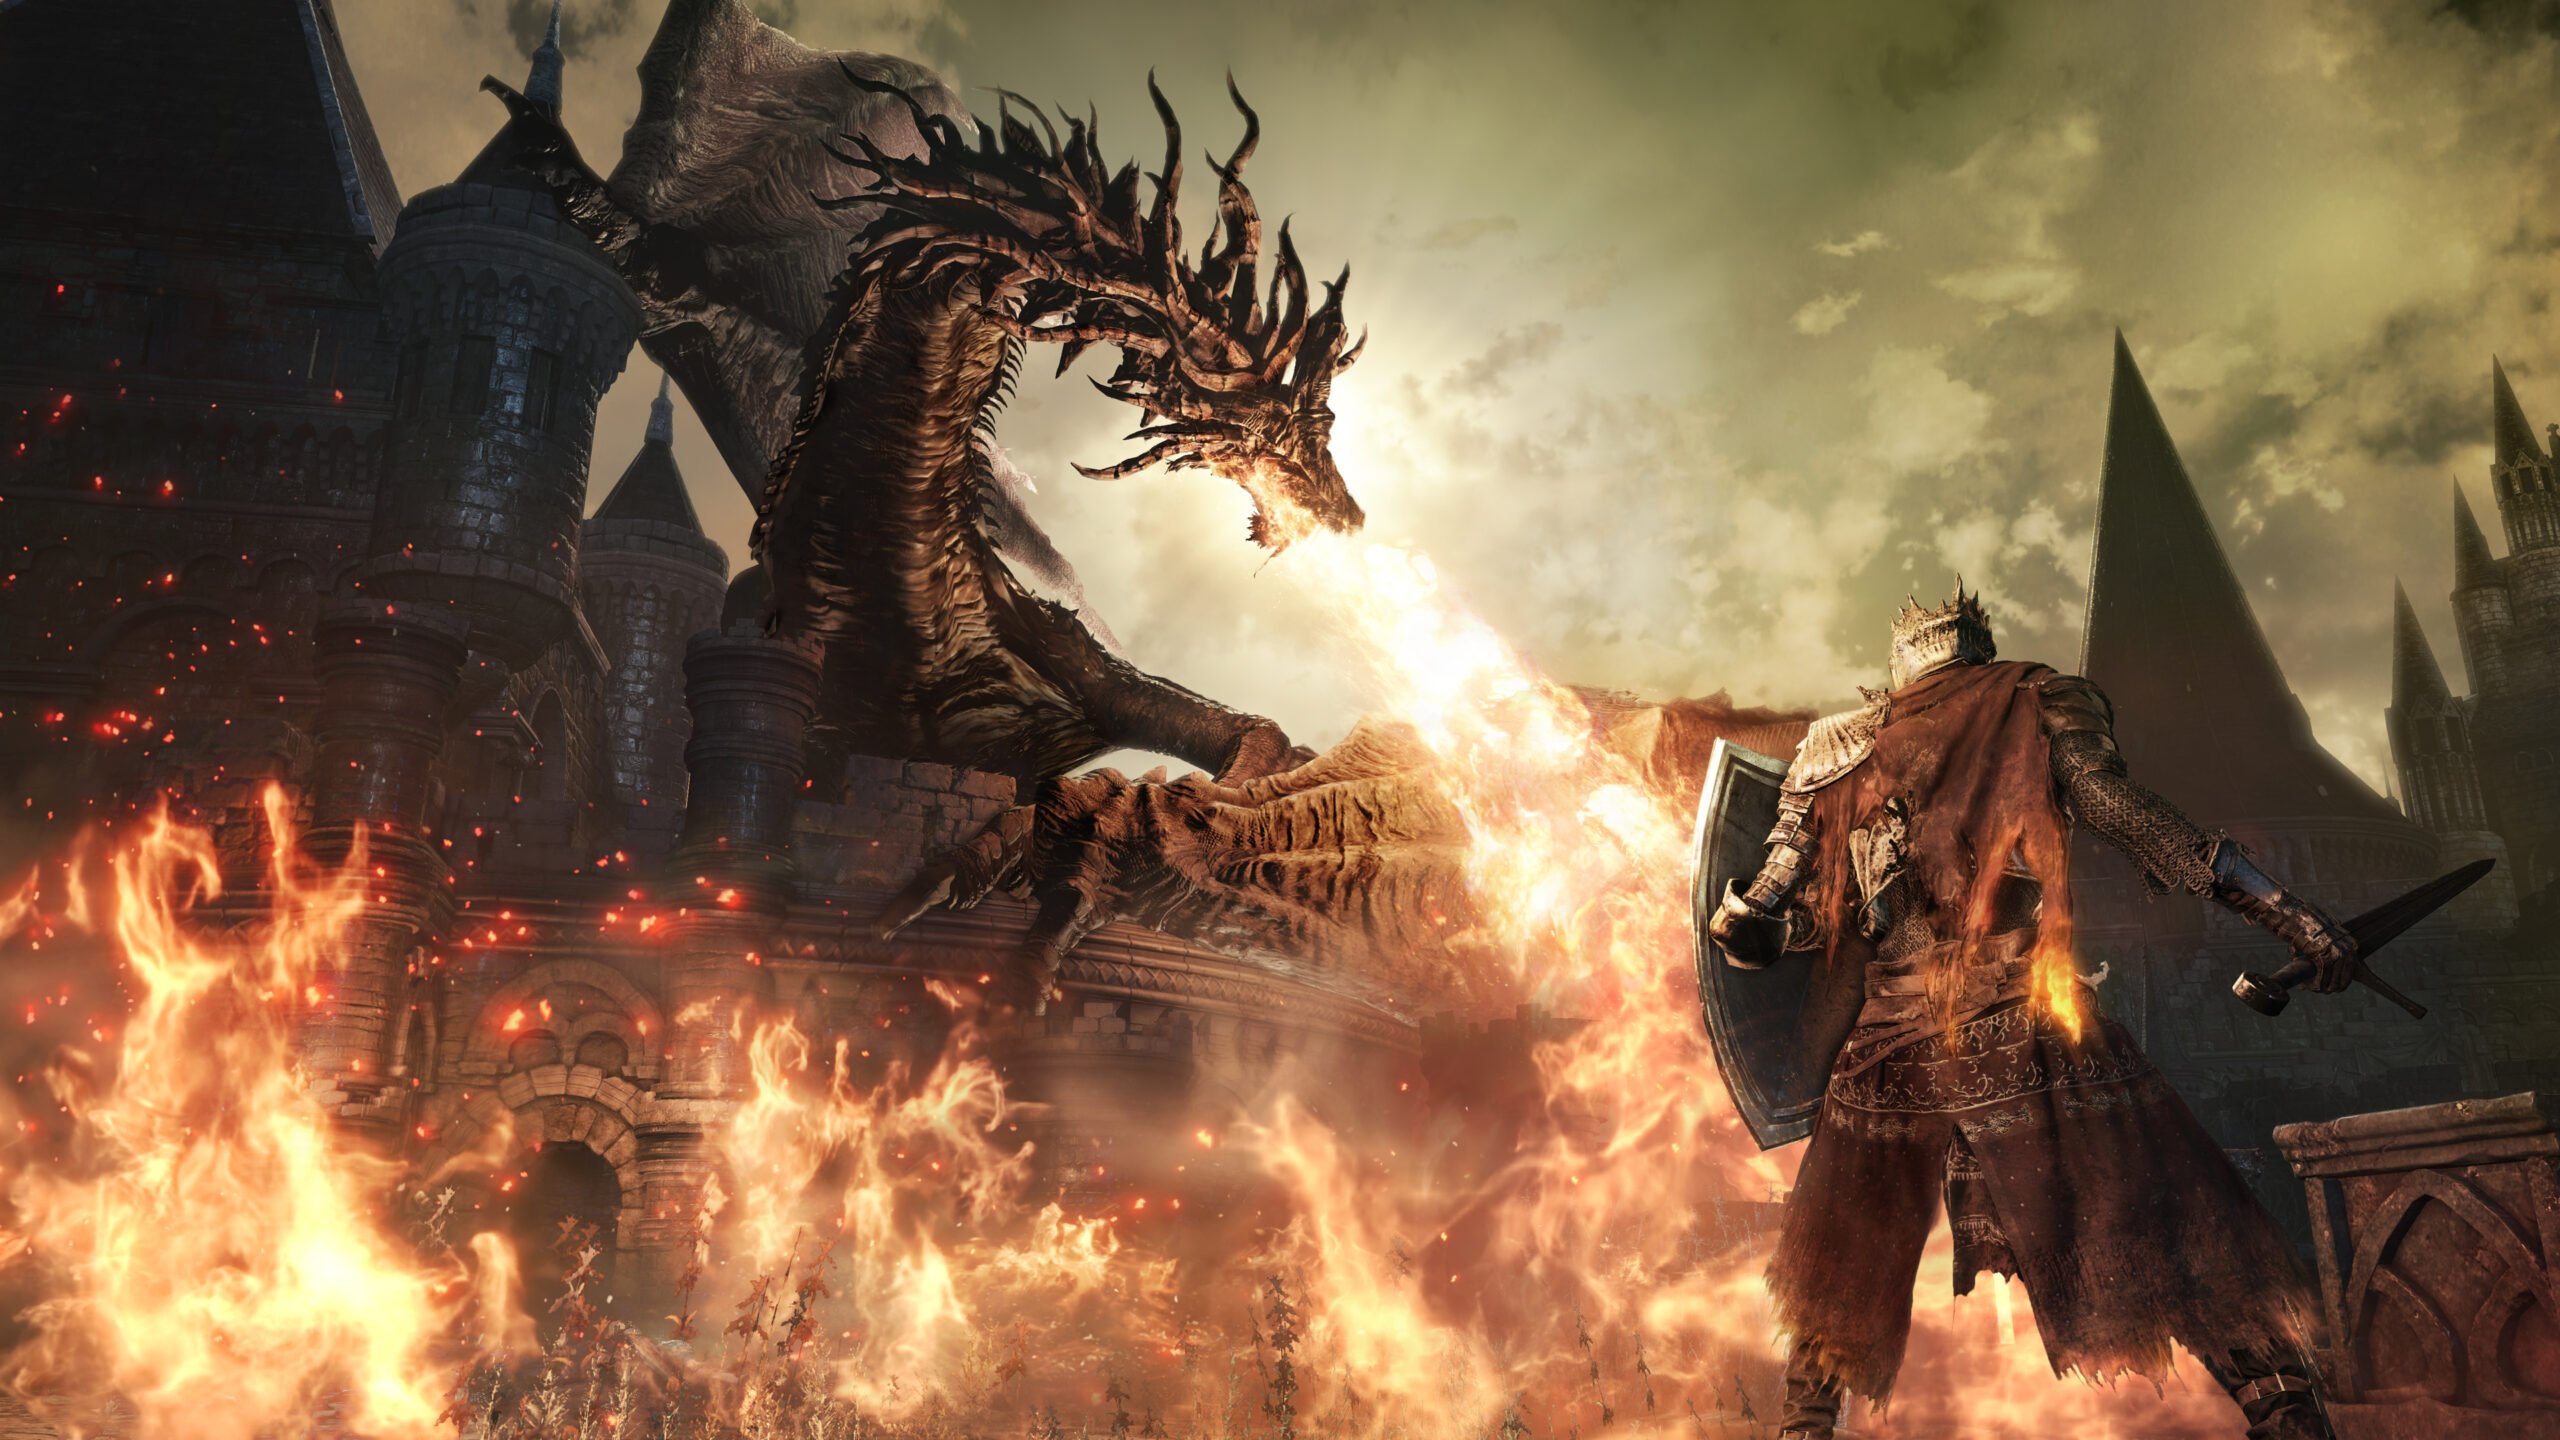 Dark Souls PC are returning after 4 months offline, but there's no confirmed date |